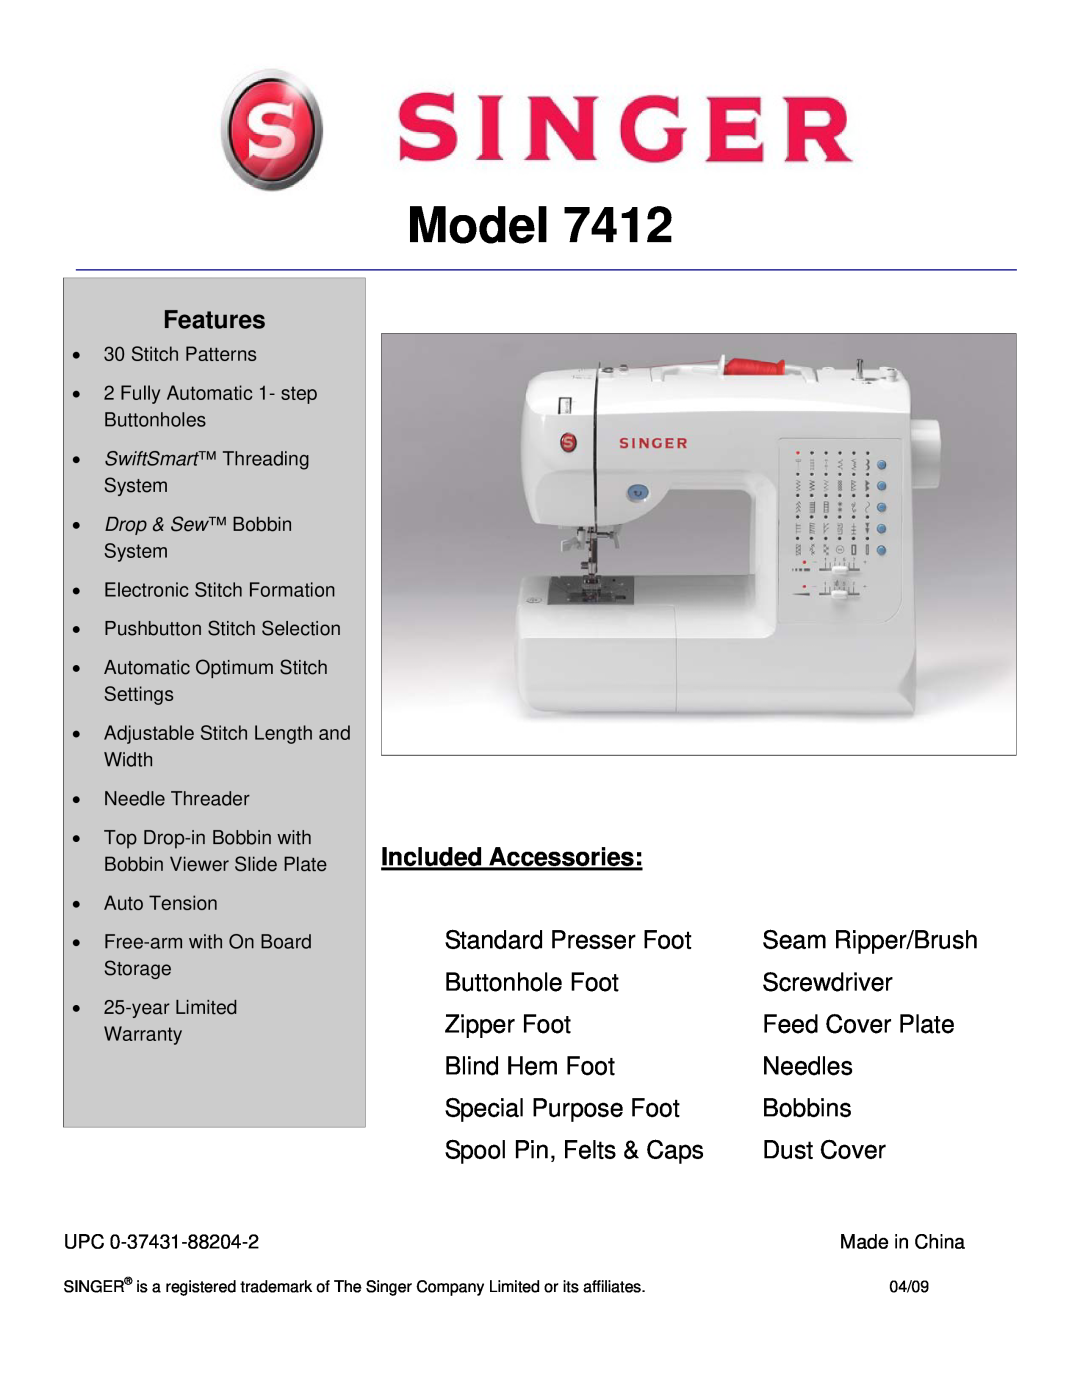 Singer 7412 warranty Model, Features, Included Accessories 